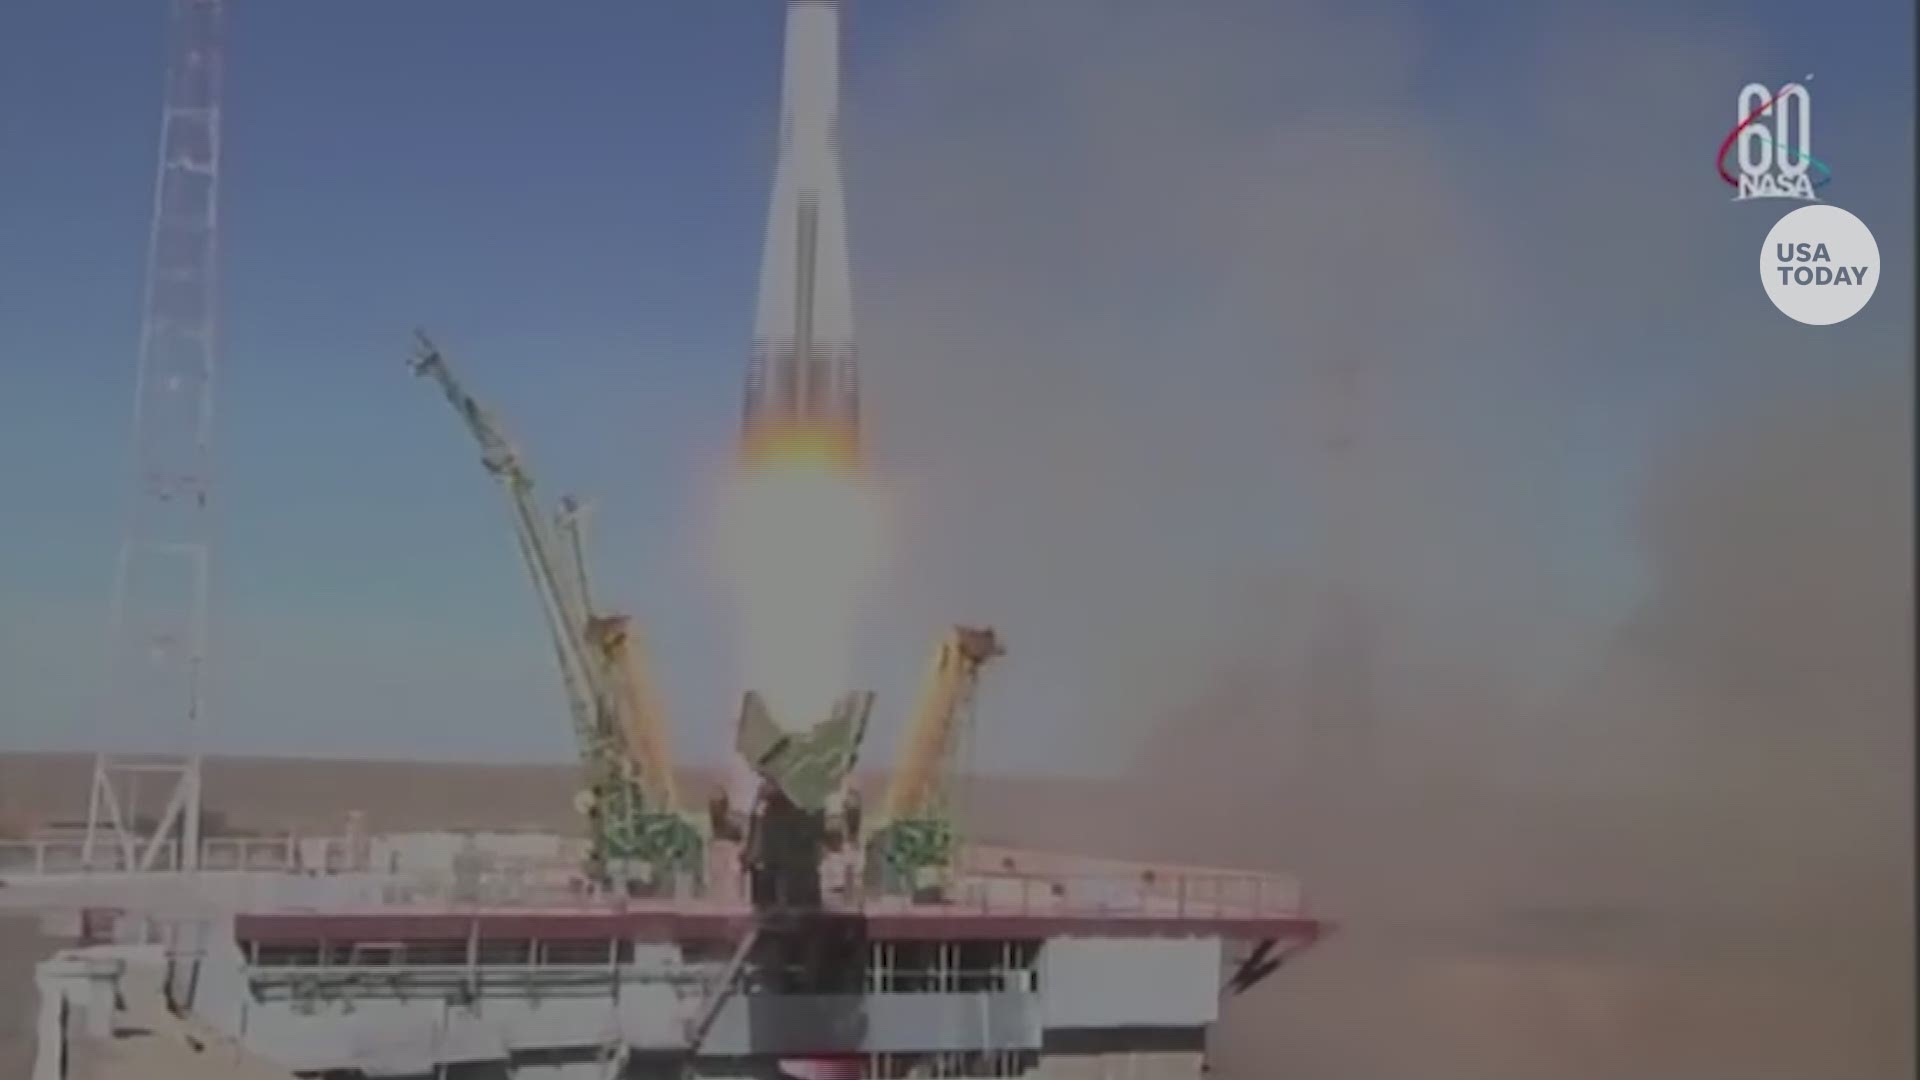 A Russian and an American astronaut were headed to the International Space Station, but their rocket's booster failed minutes after take off.